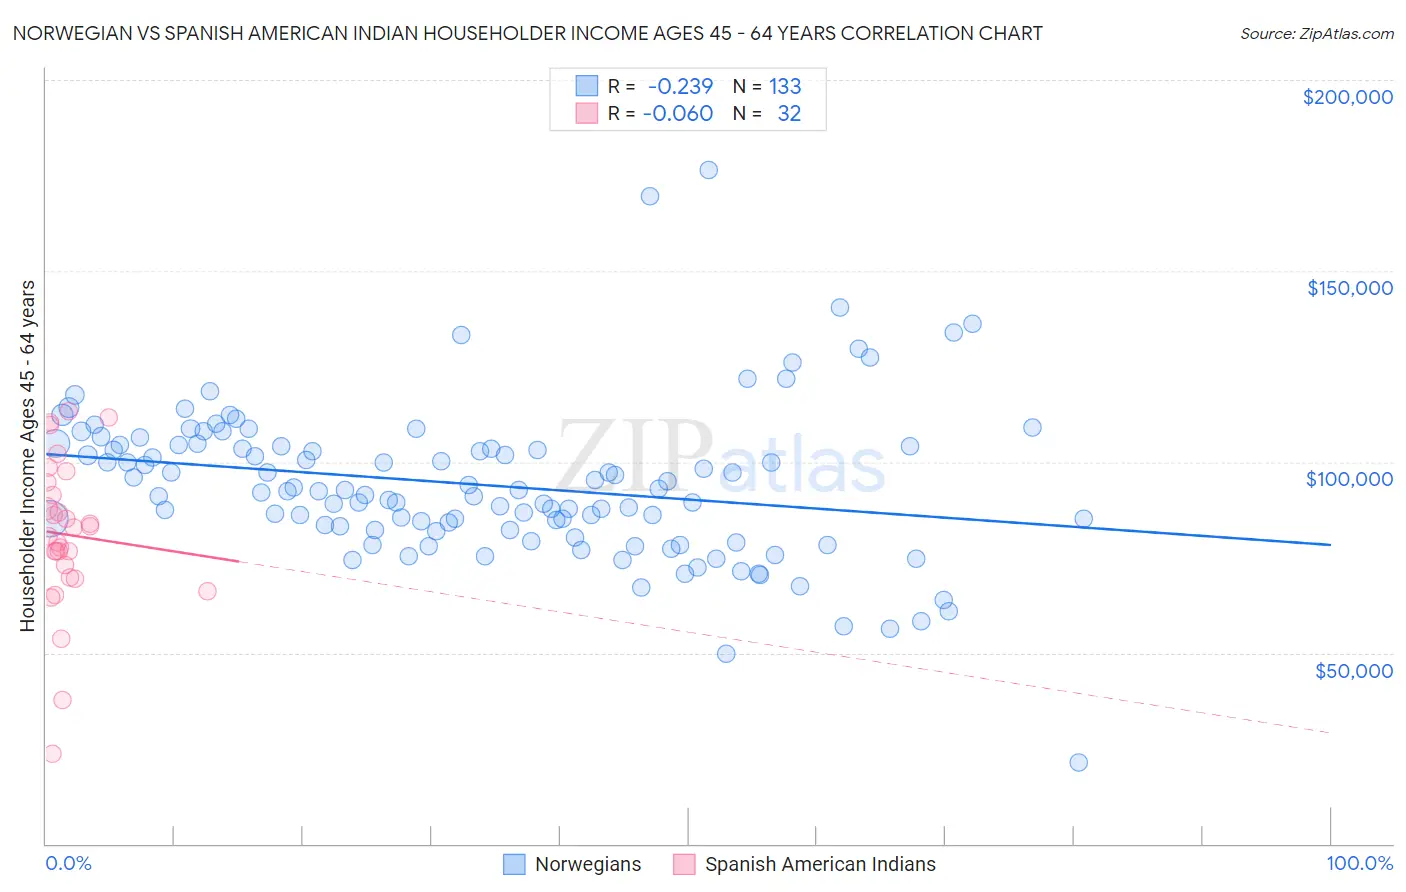 Norwegian vs Spanish American Indian Householder Income Ages 45 - 64 years